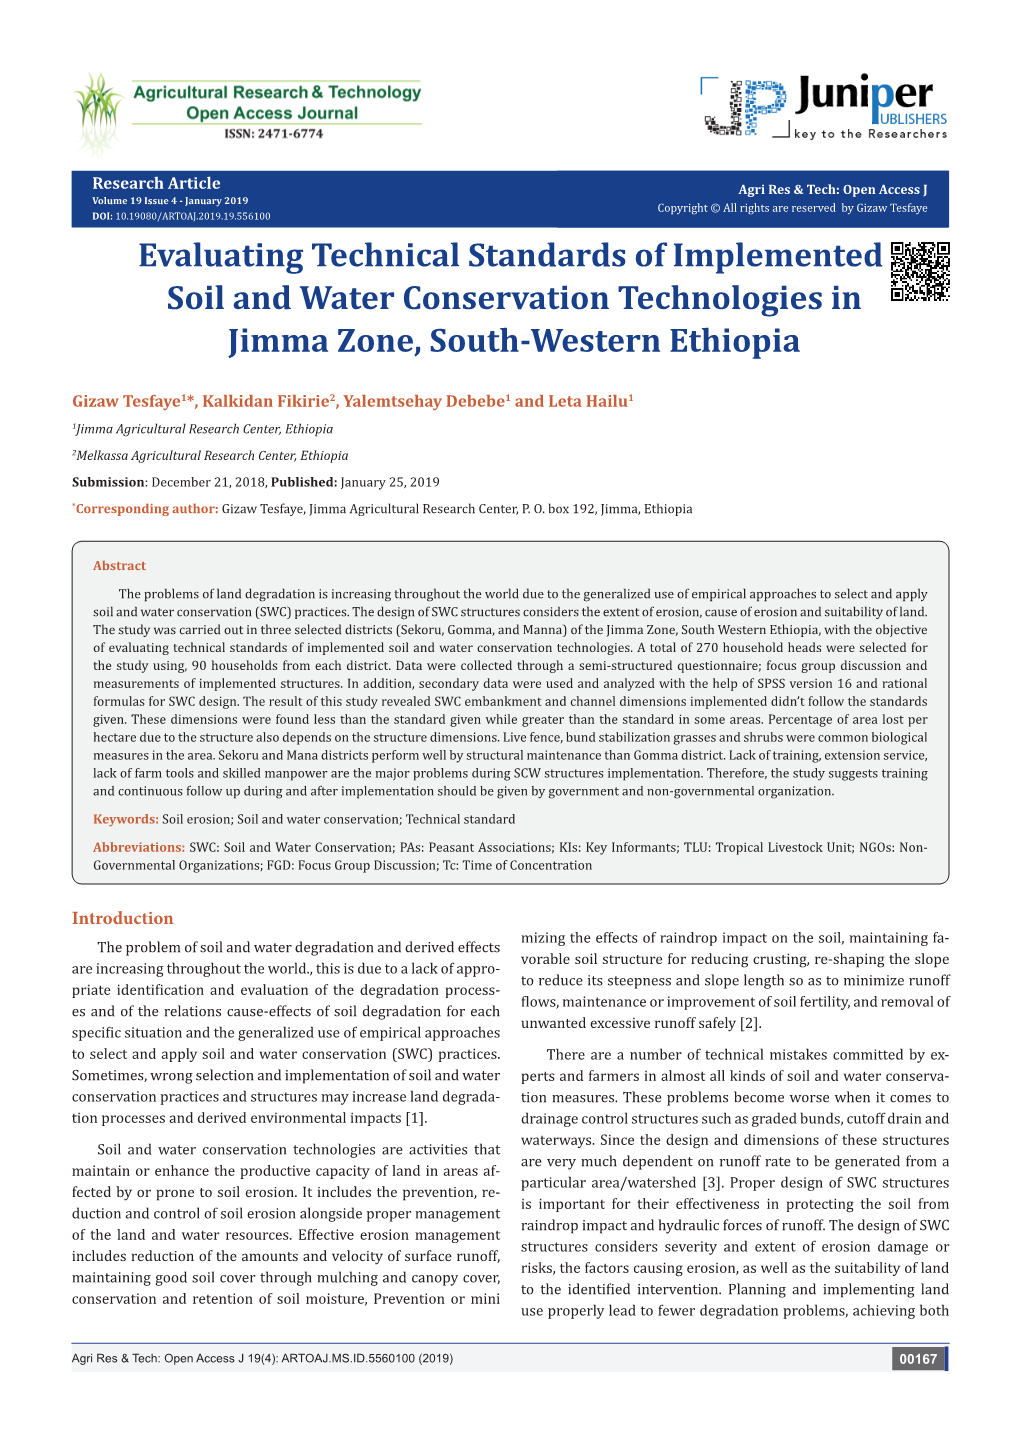 Evaluating Technical Standards of Implemented Soil and Water Conservation Technologies in Jimma Zone, South-Western Ethiopia